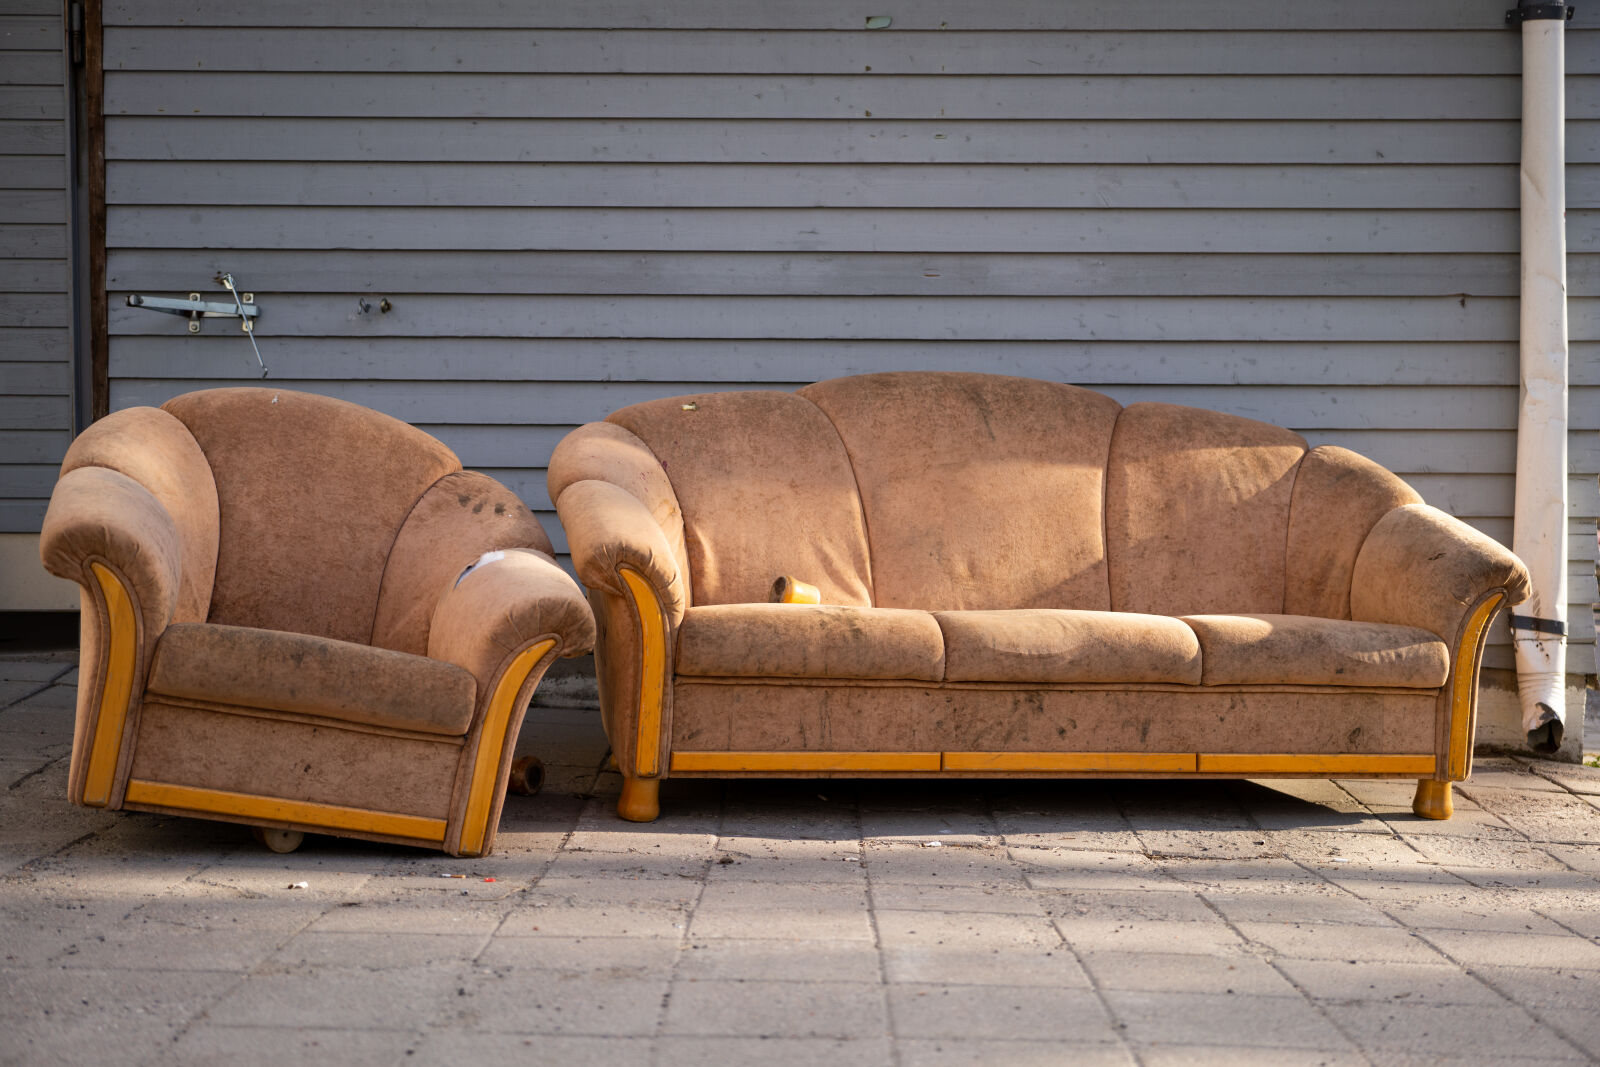 Sony FE 50mm F2.5 G sample photo. Abandoned sofas on the photography